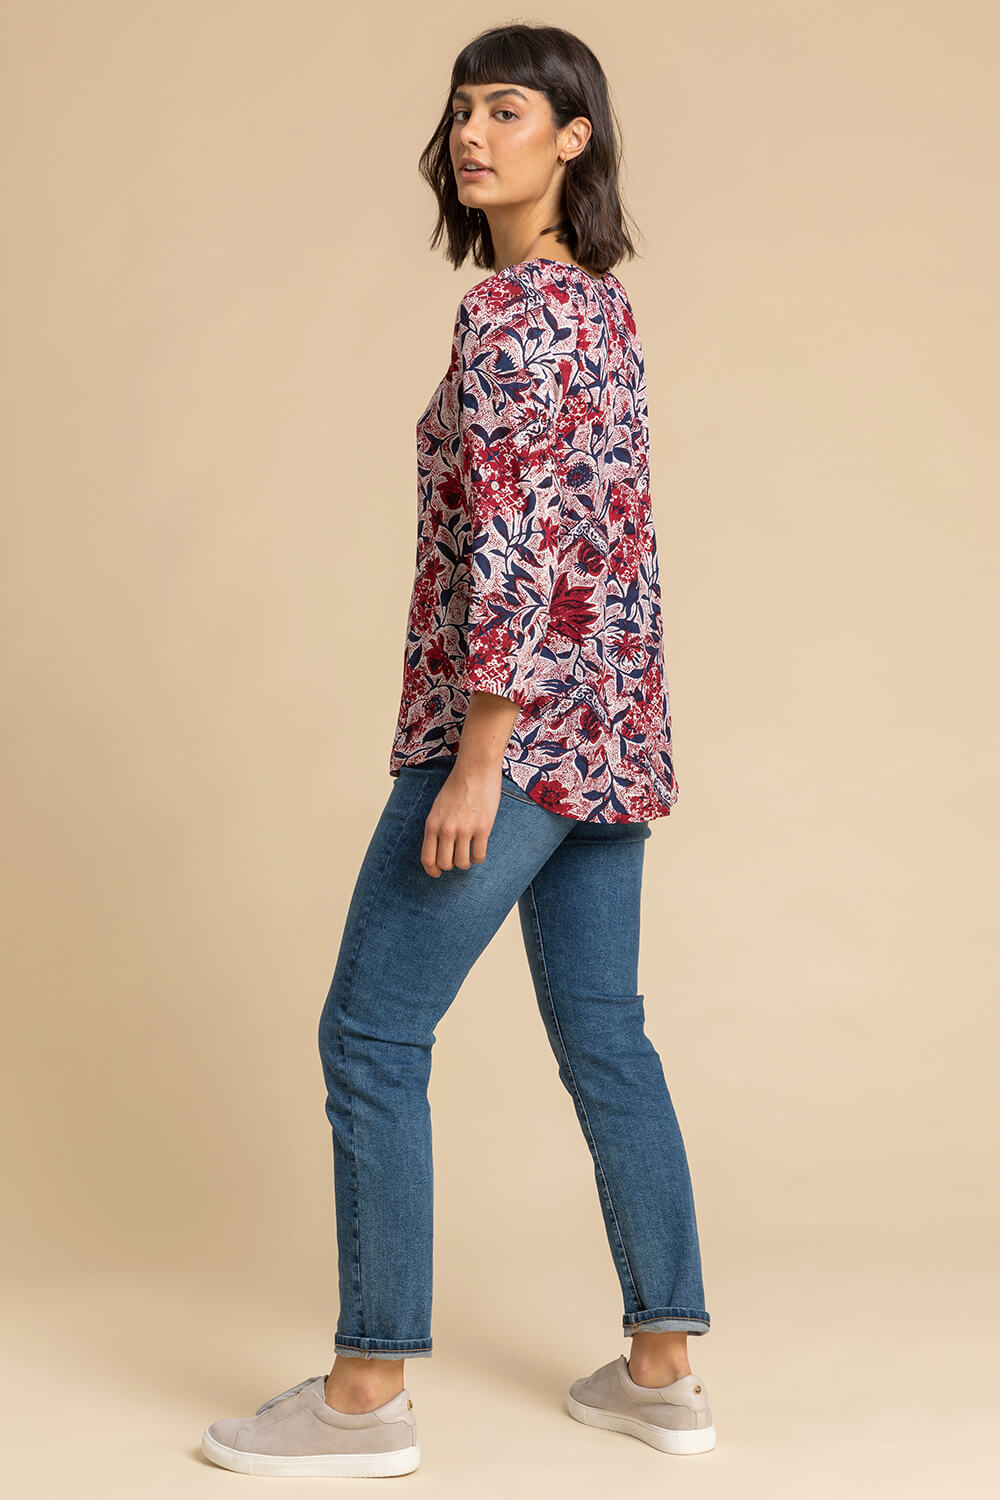 Red Floral Leaf Print Button Top, Image 2 of 4